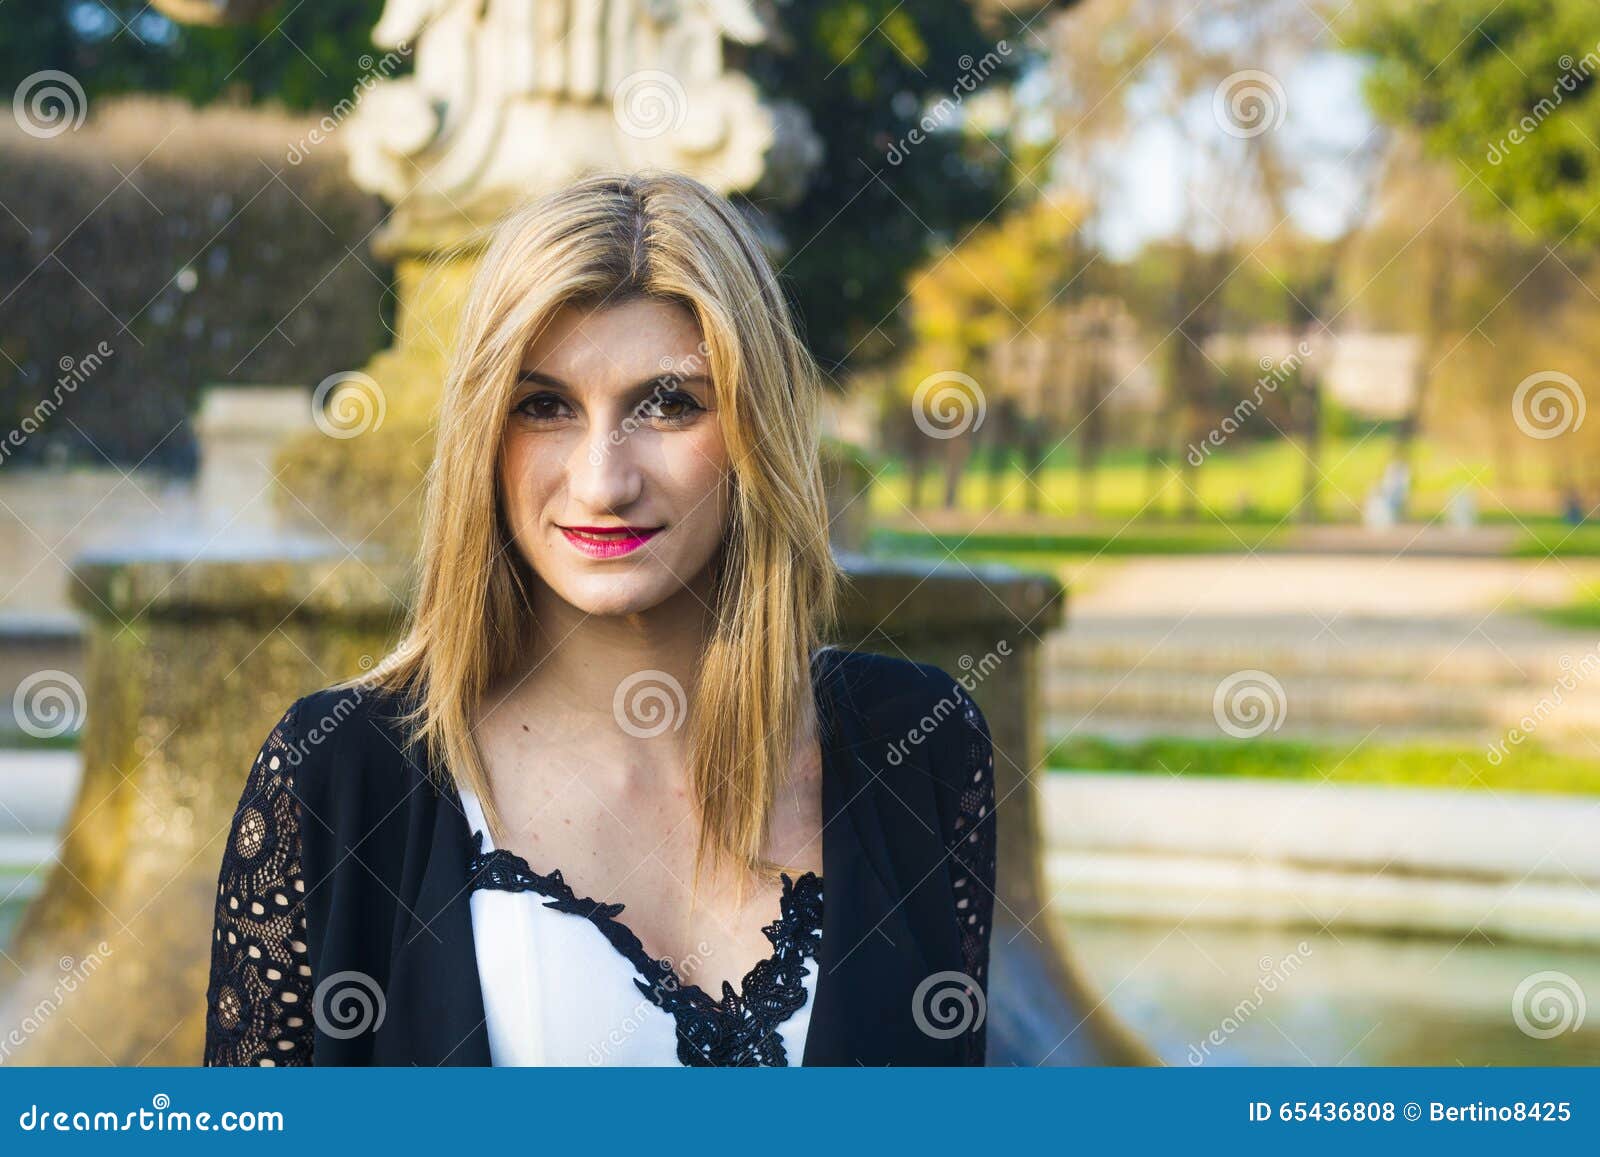 Smile of a blond Italian stock photo. Image of background - 65436808